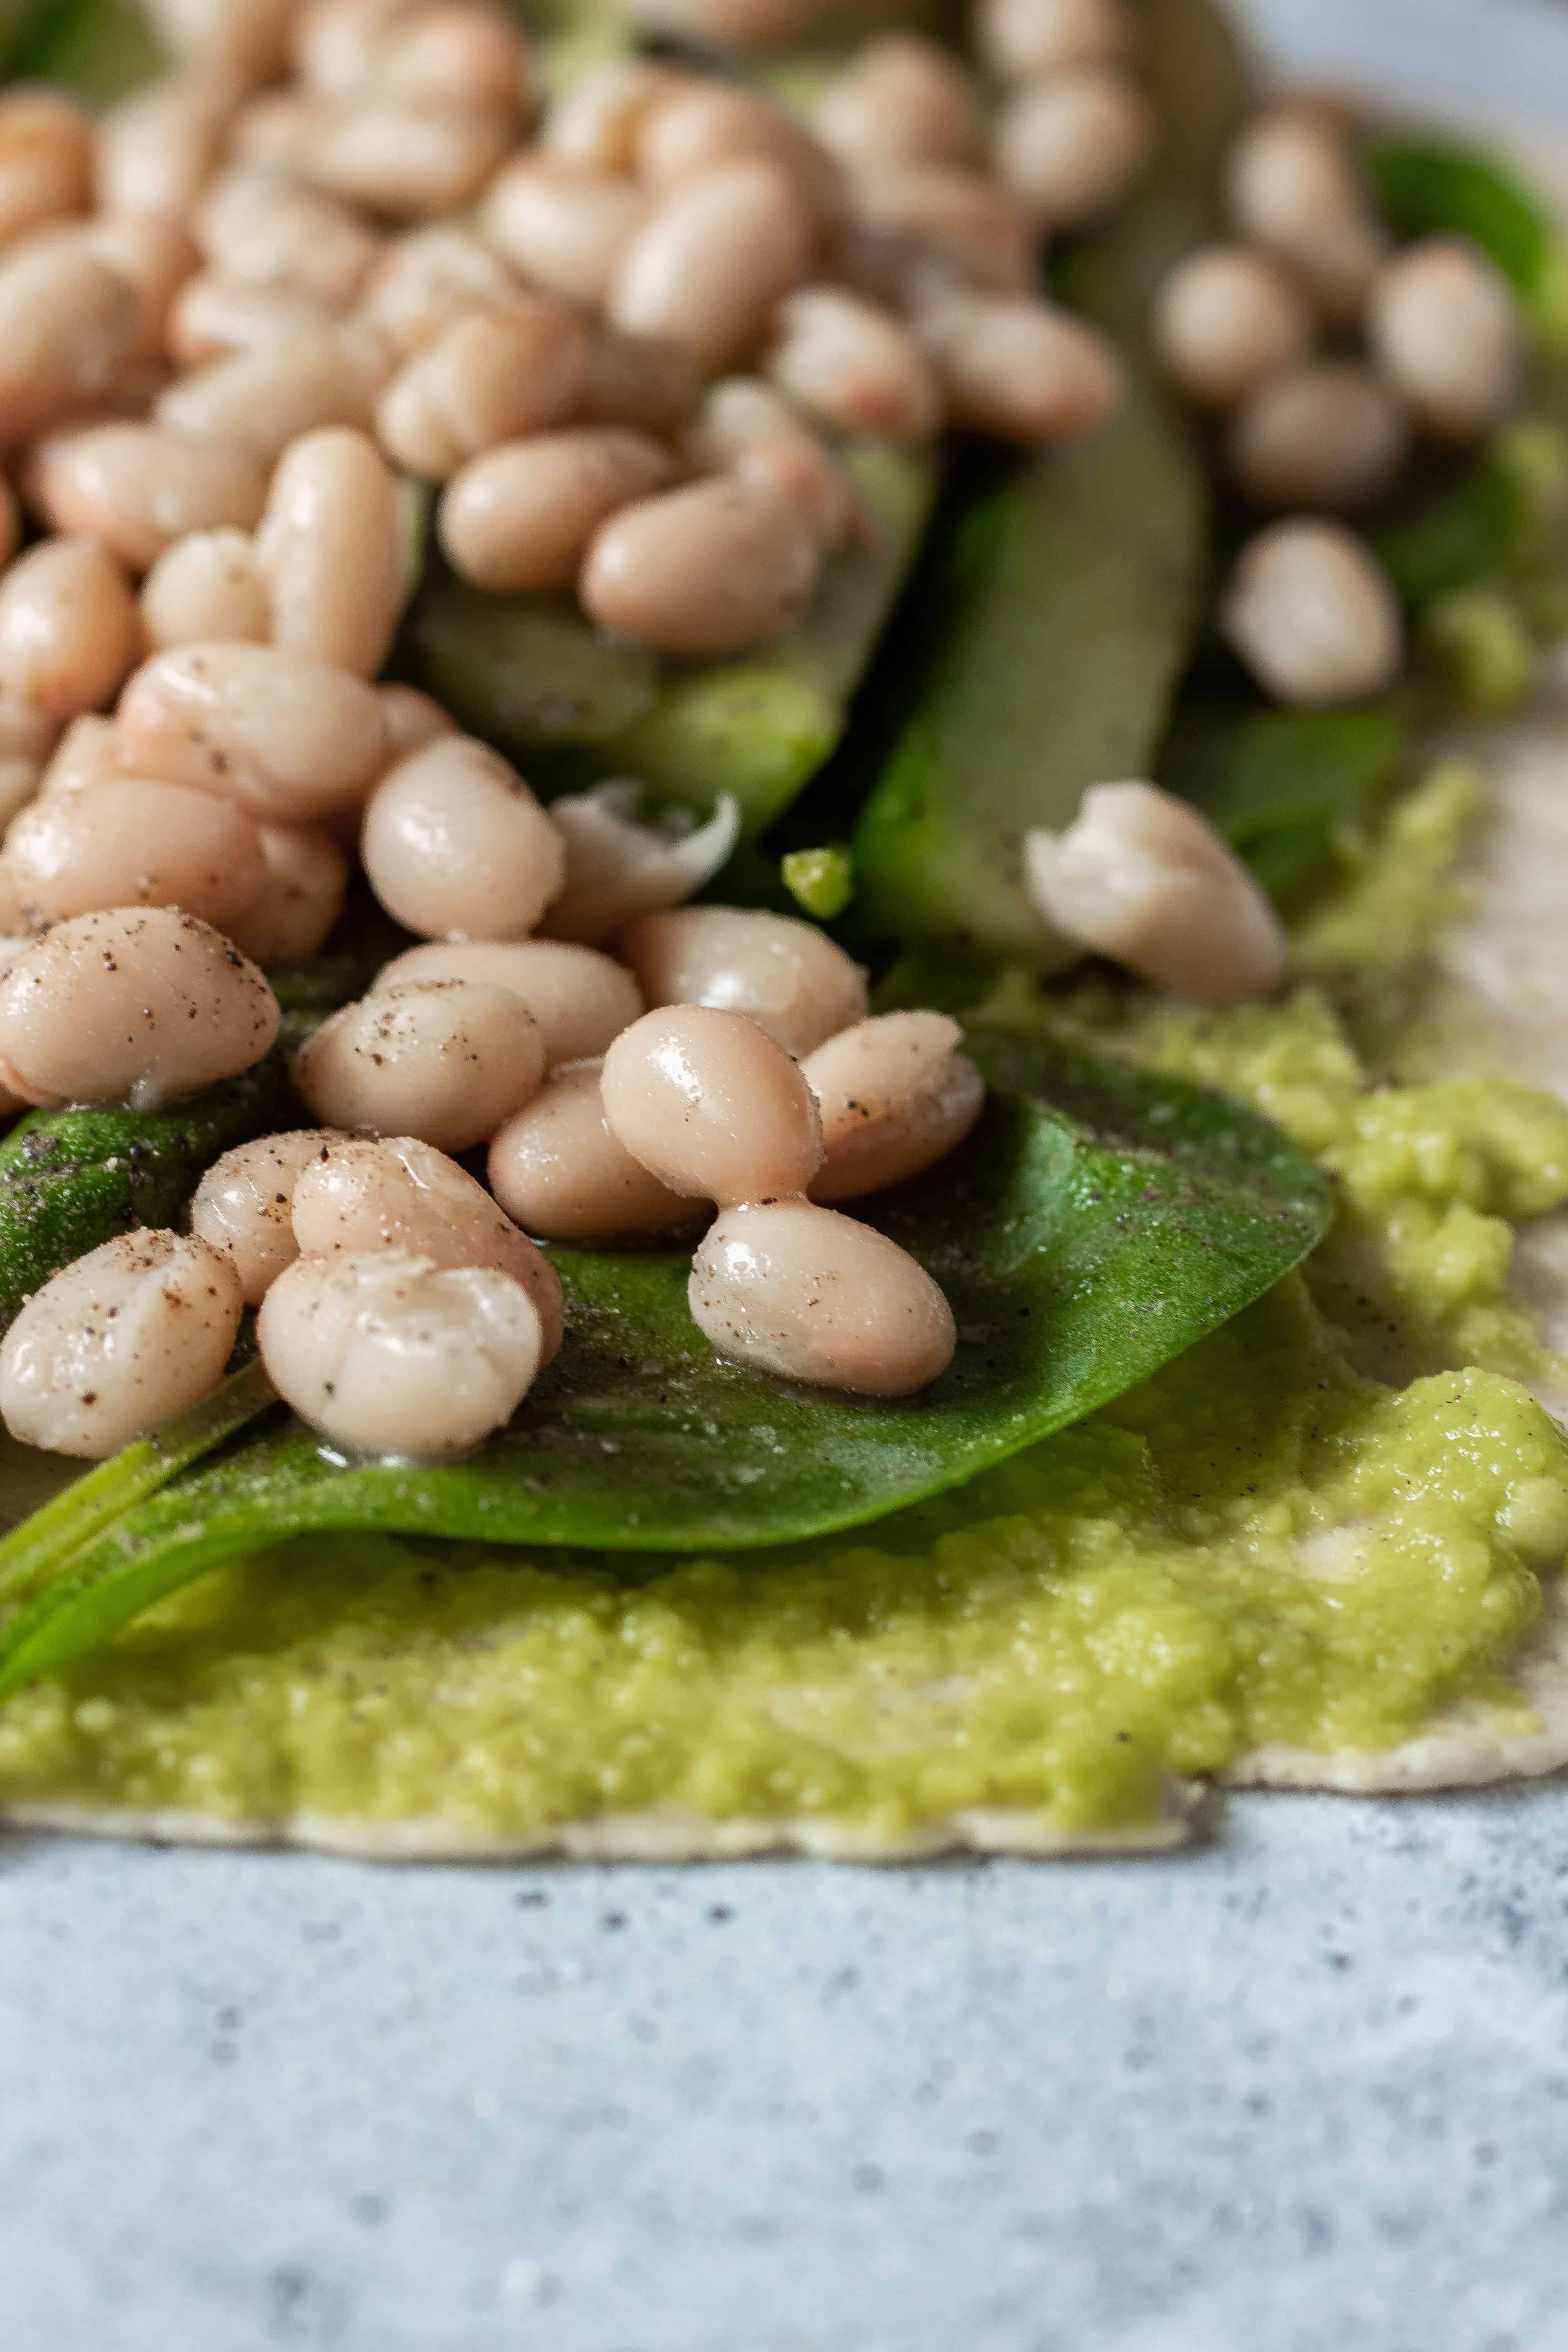 Avocado White Bean Wrap - made with spinach and cucumber. A super green, filling, protein-rich wrap that makes a perfect lunch to take with you. You can make it part of your weight loss diet as well. | The Green Loot #vegan #veganrecipes #dairyfree #healthyeating